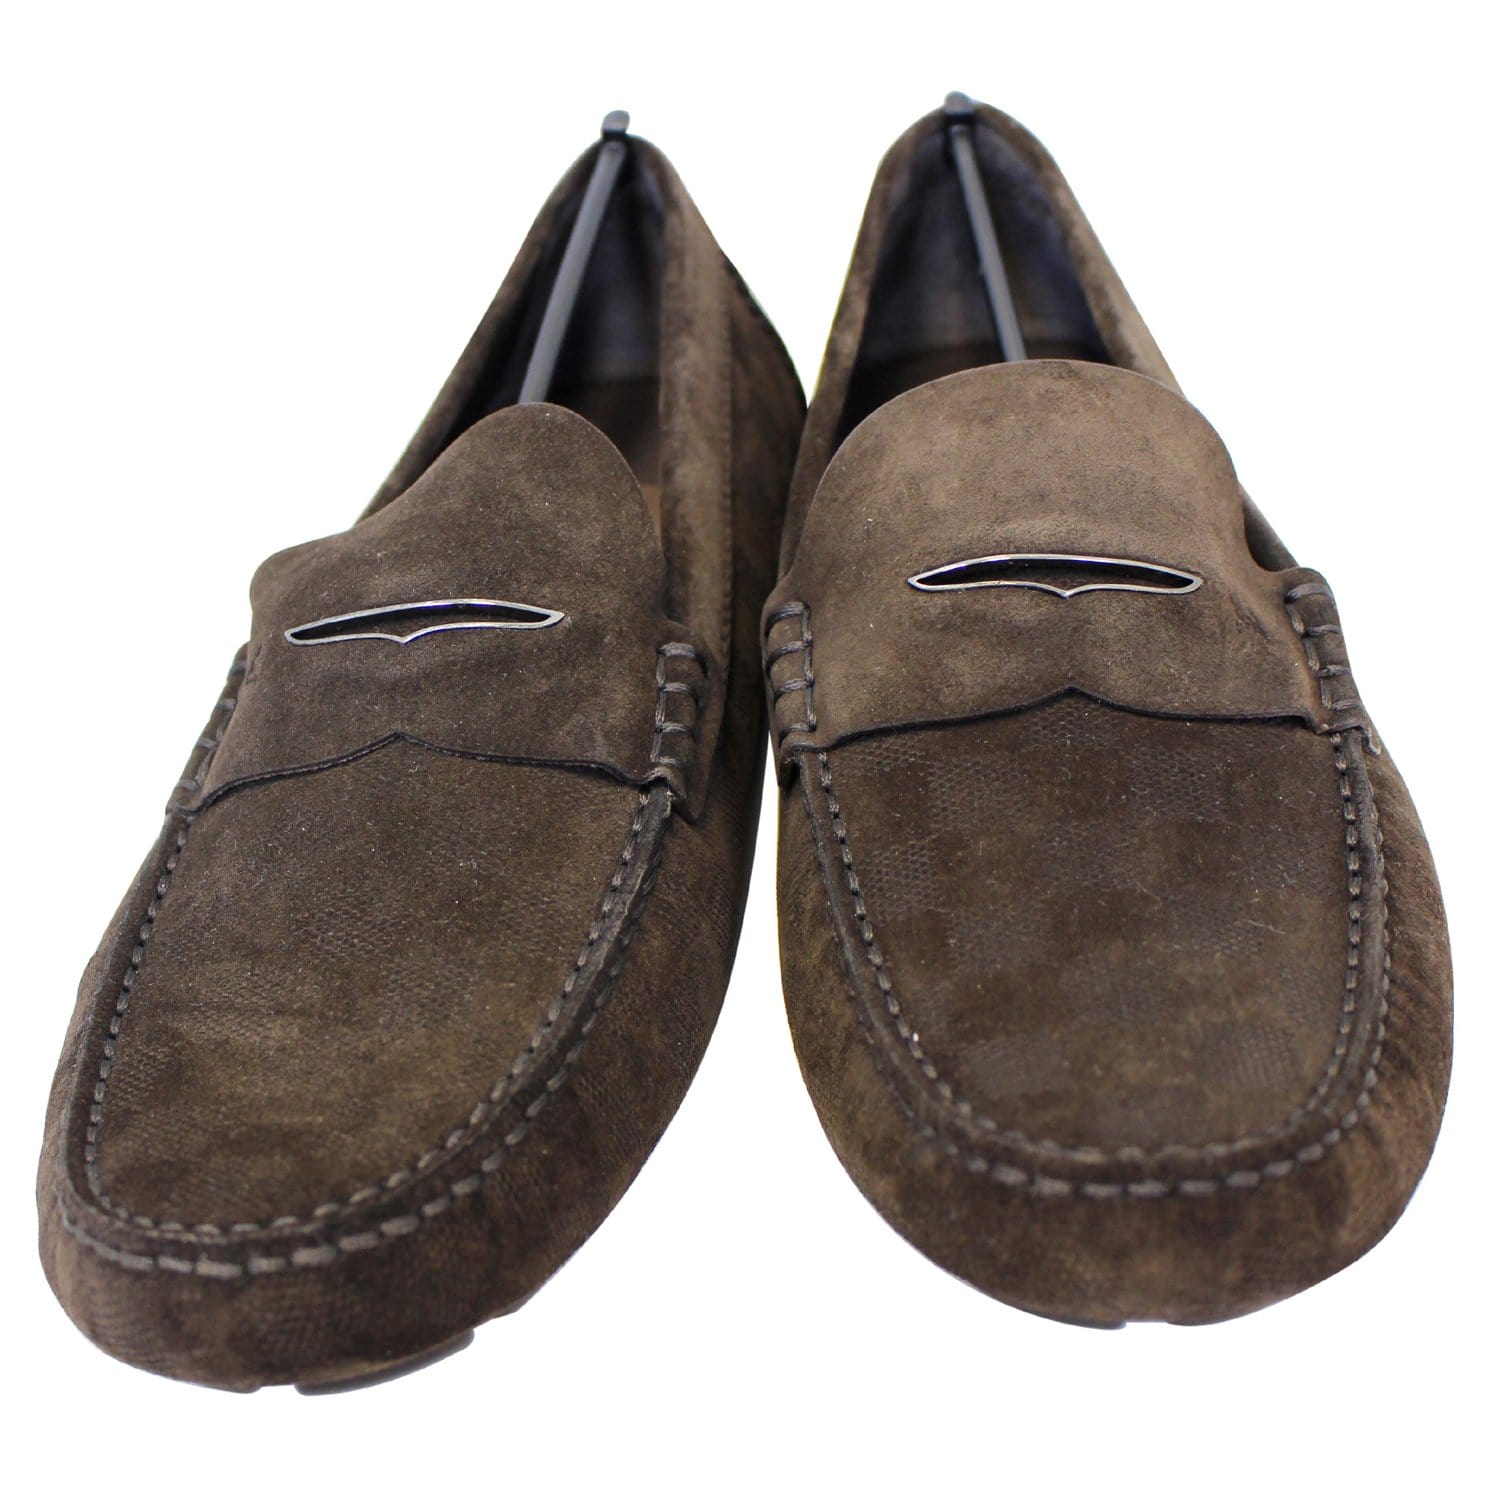 Louis Vuitton Moccasin/Loafers/FA 0162 Brown 9.5 EU, 11.5 US